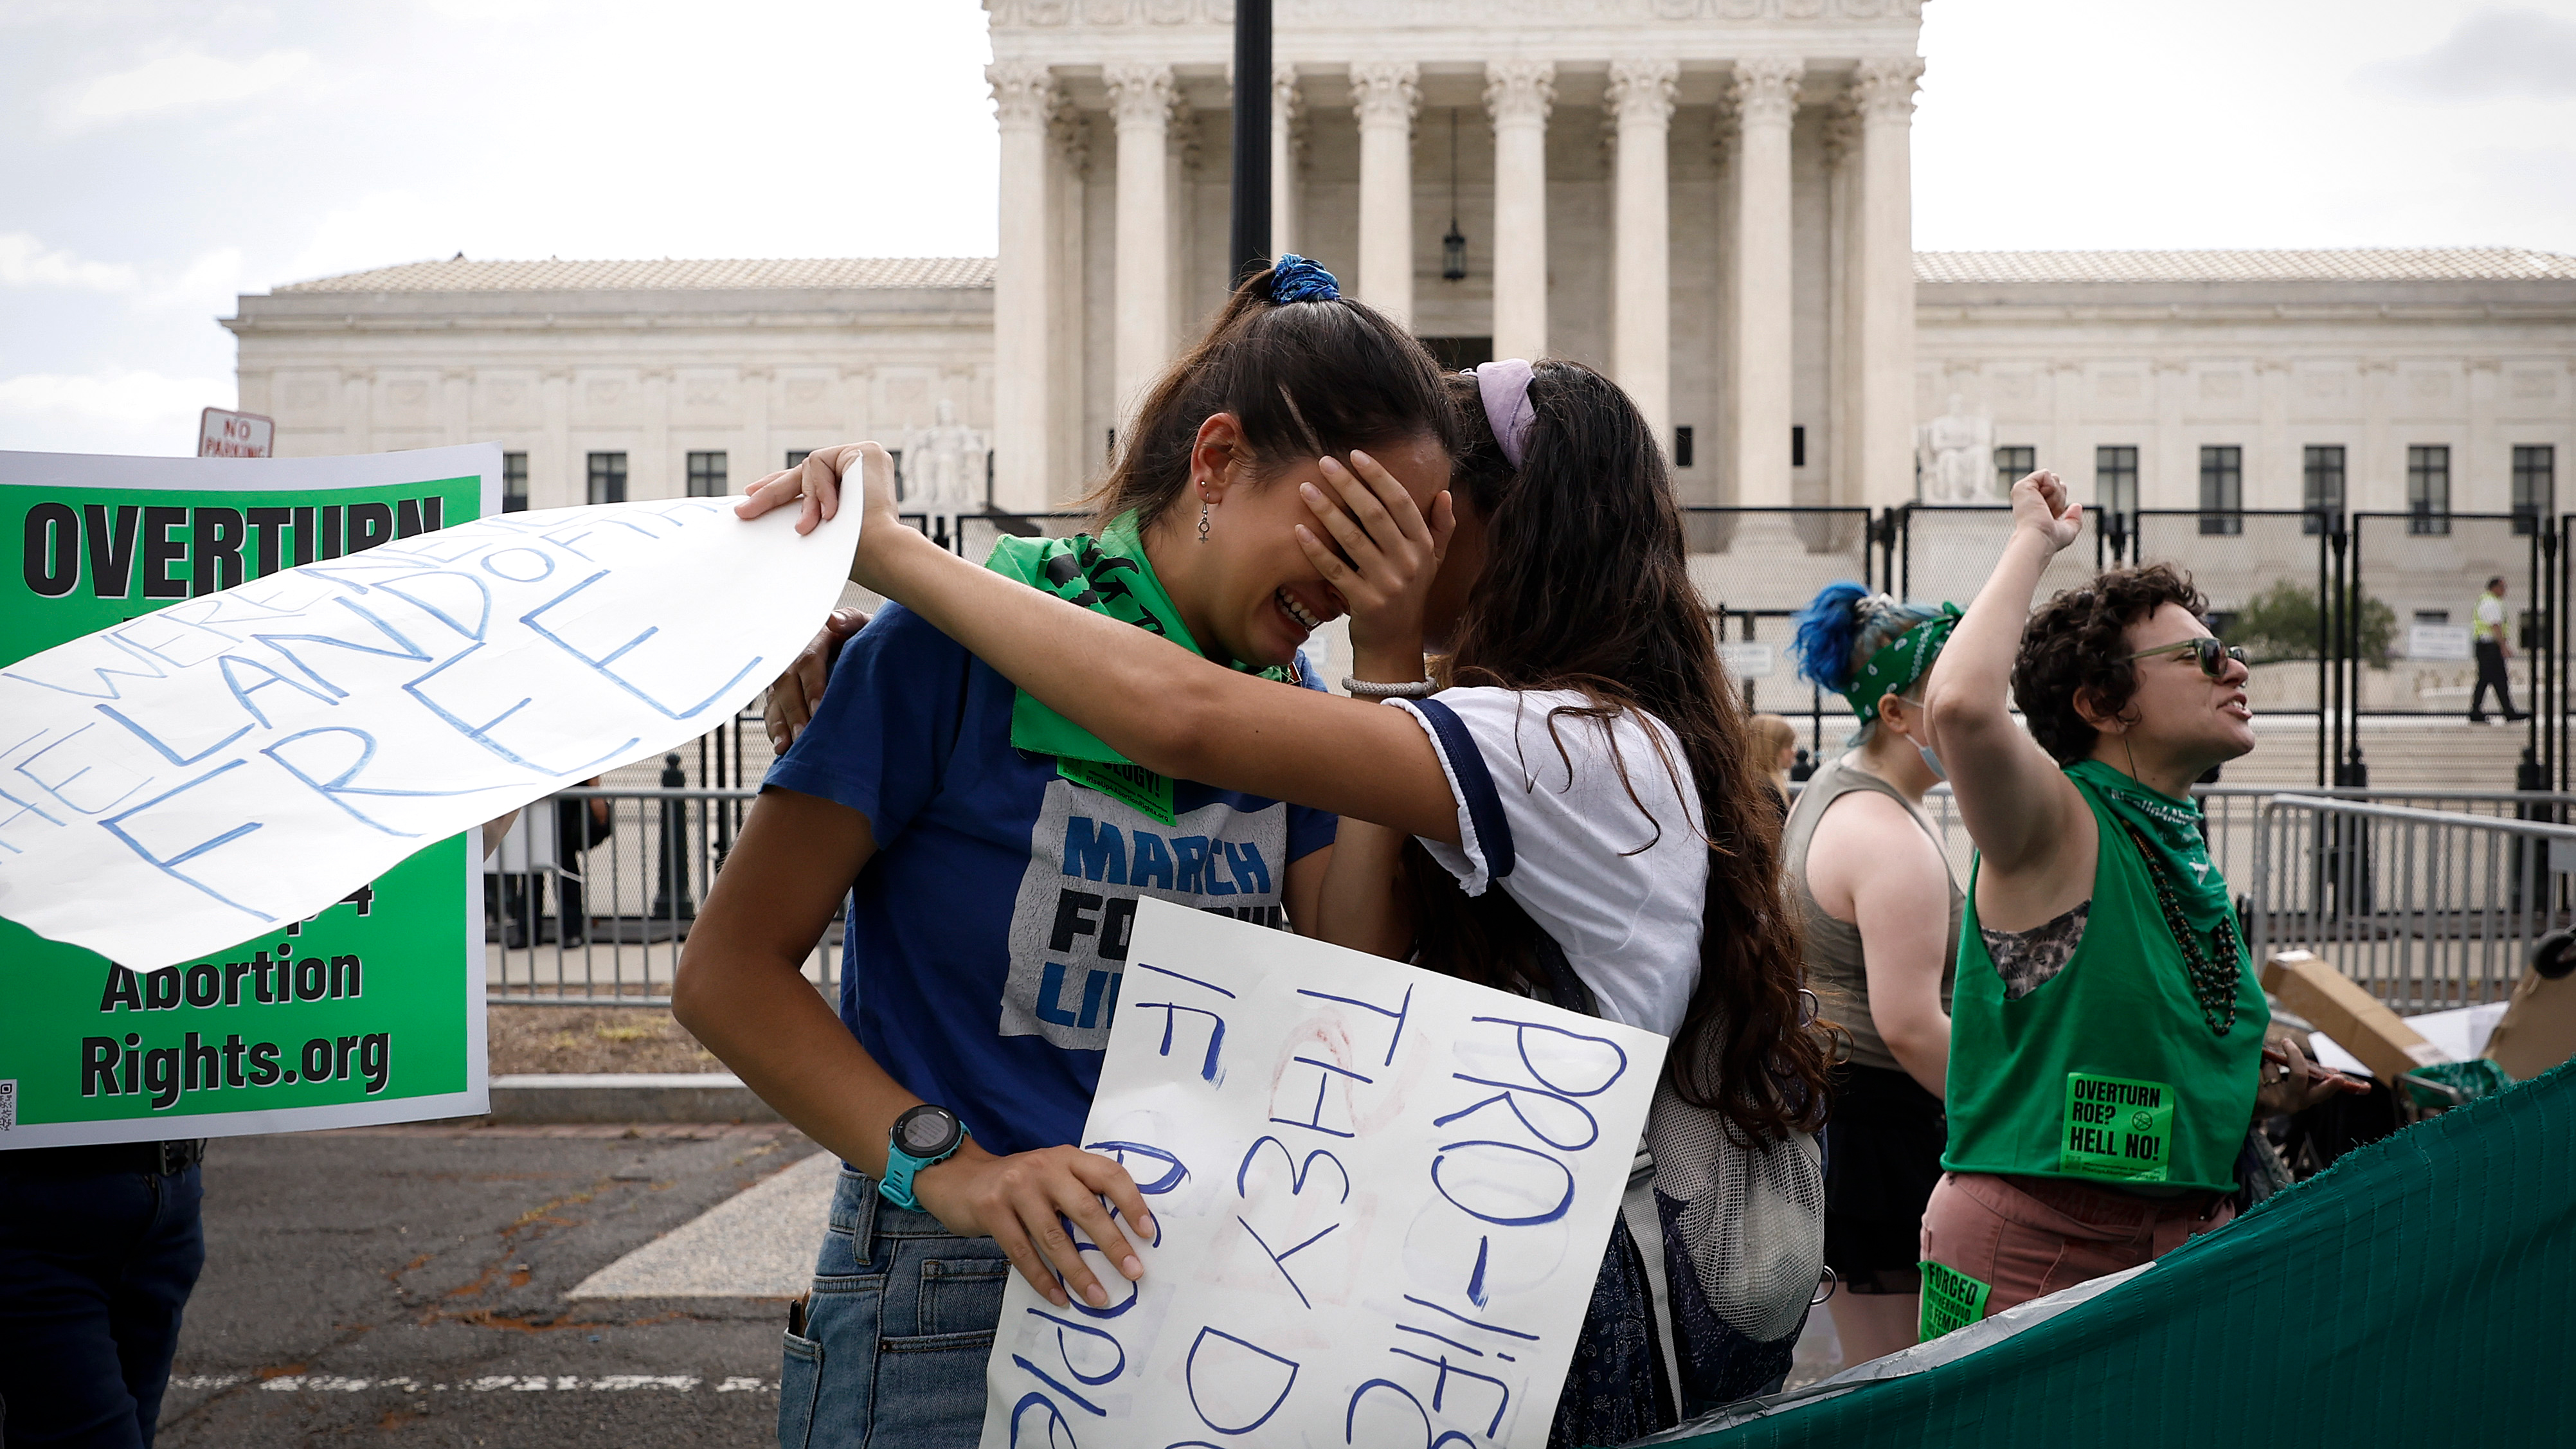 Abortion rights activists react in front of the Supreme Court in Washington on June 24.